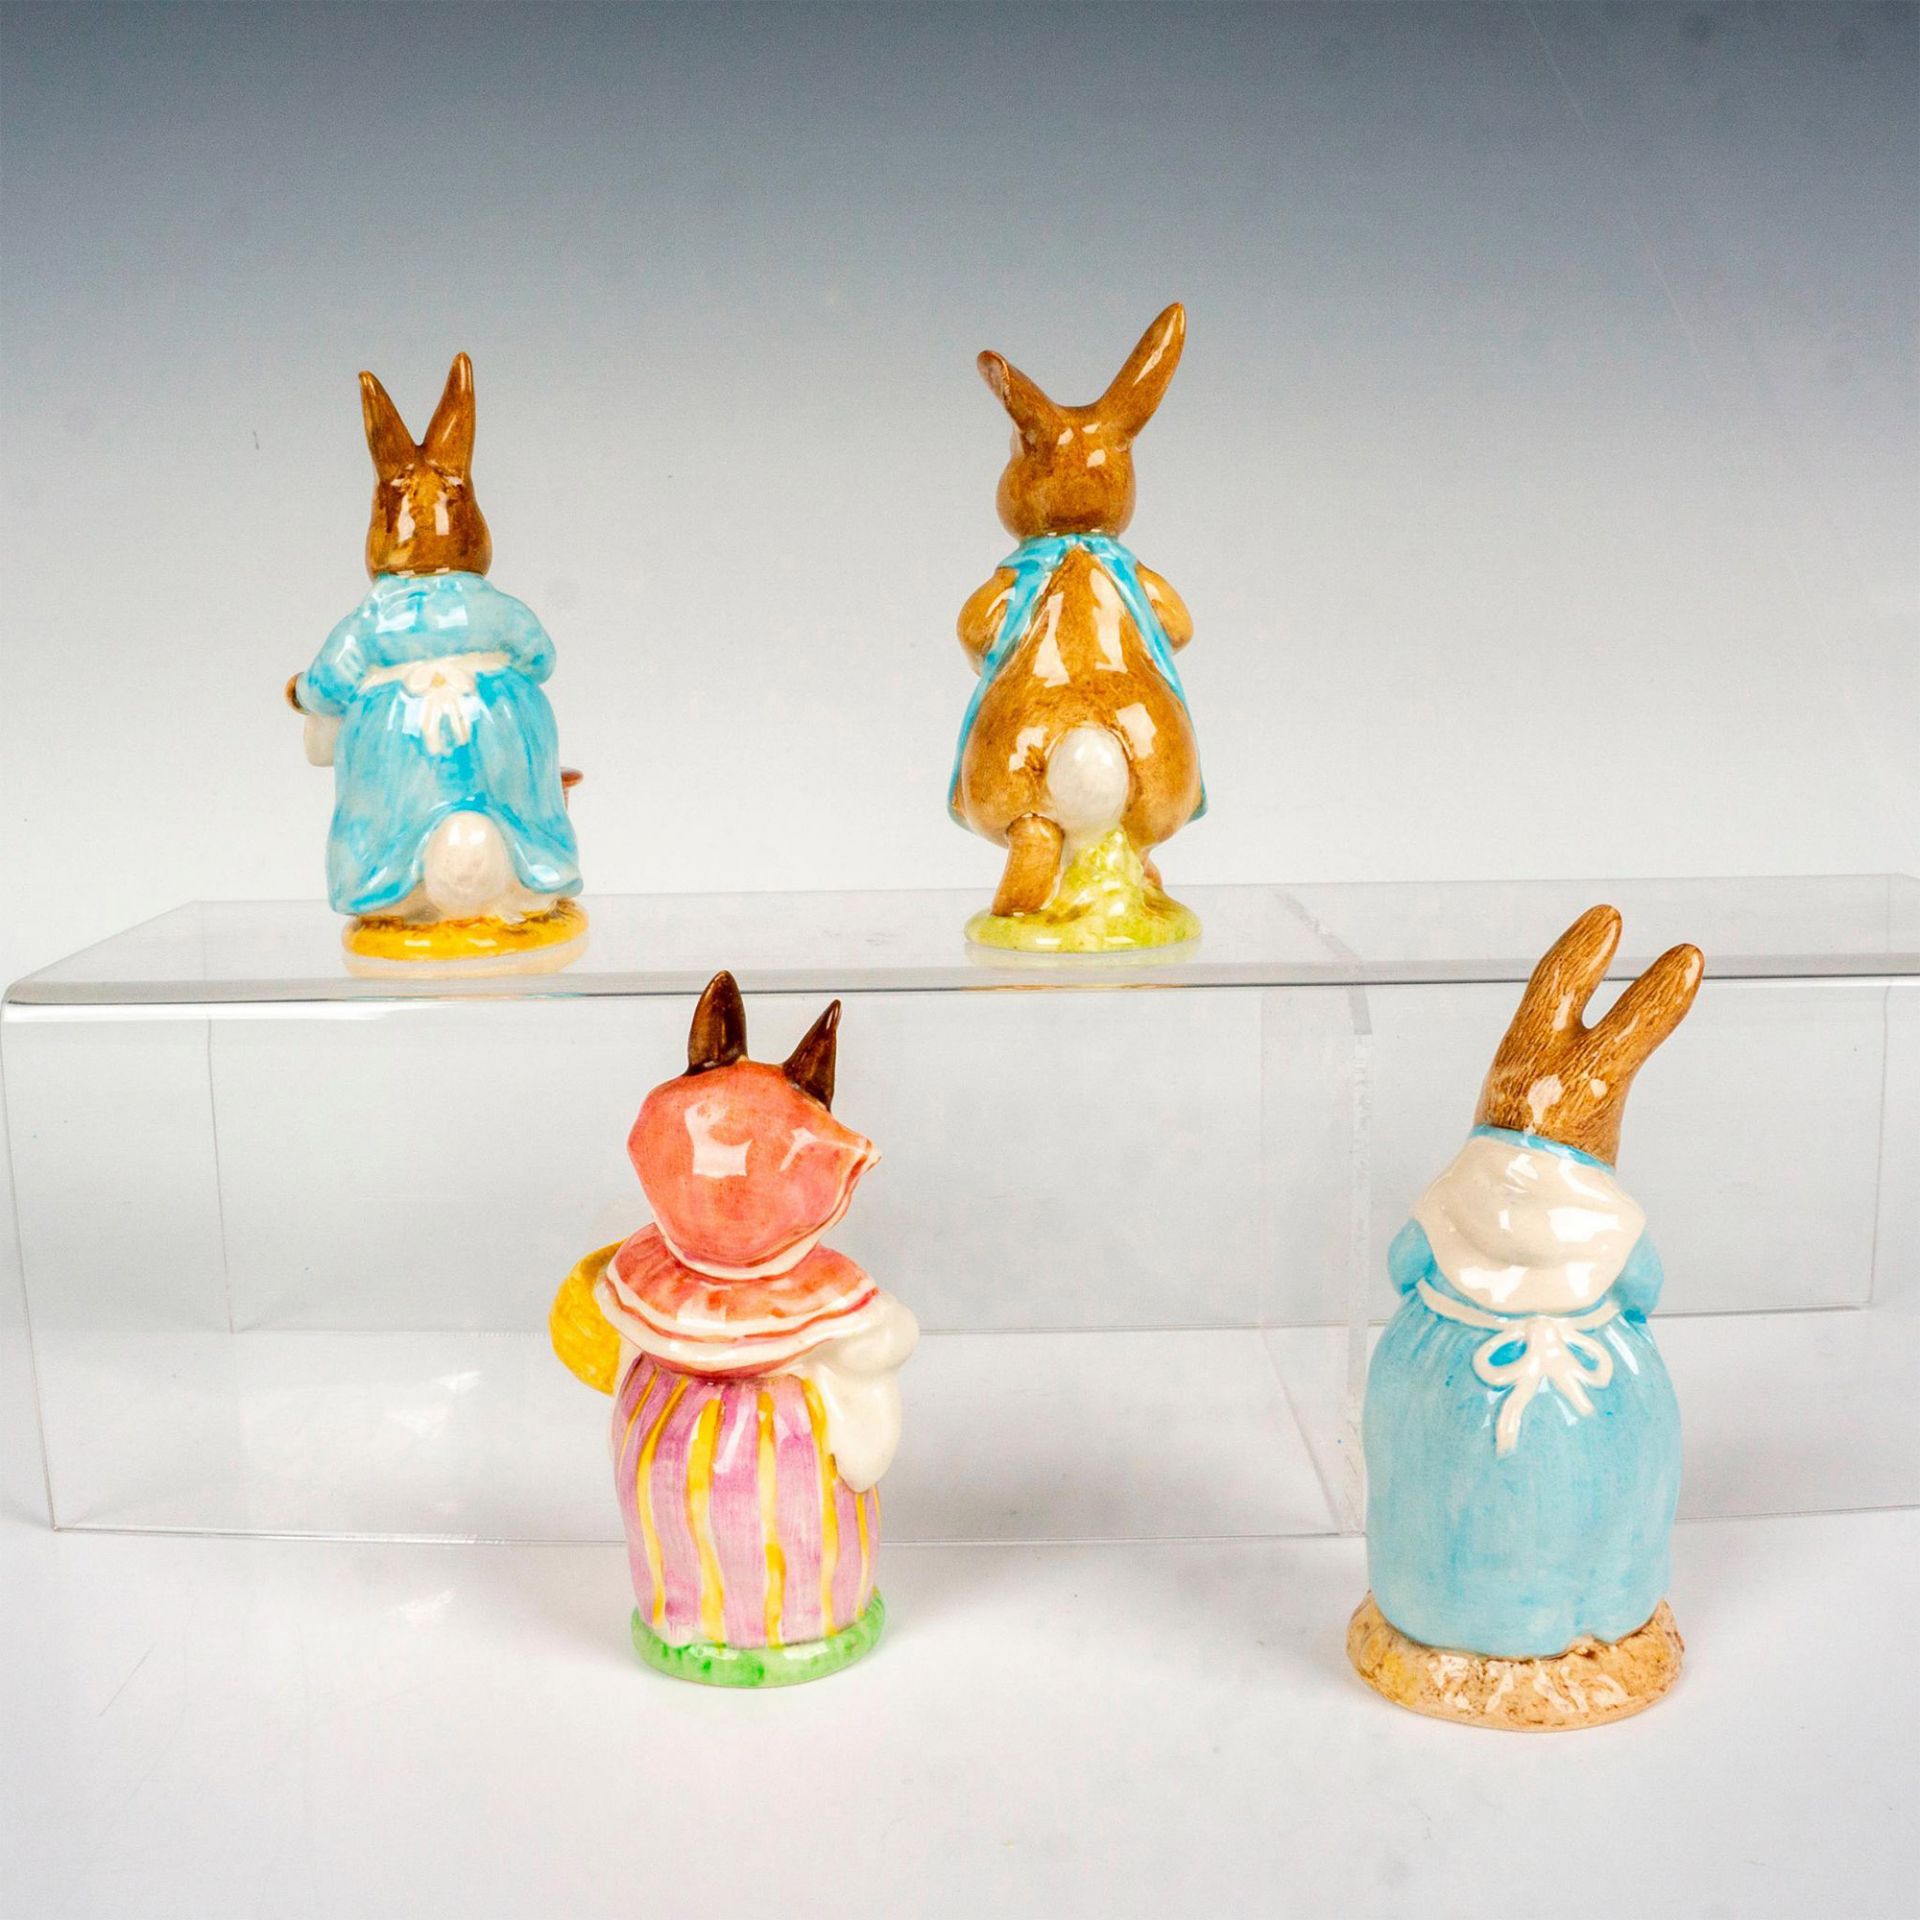 4pc Beatrix Potter Themed Figures - Image 2 of 3